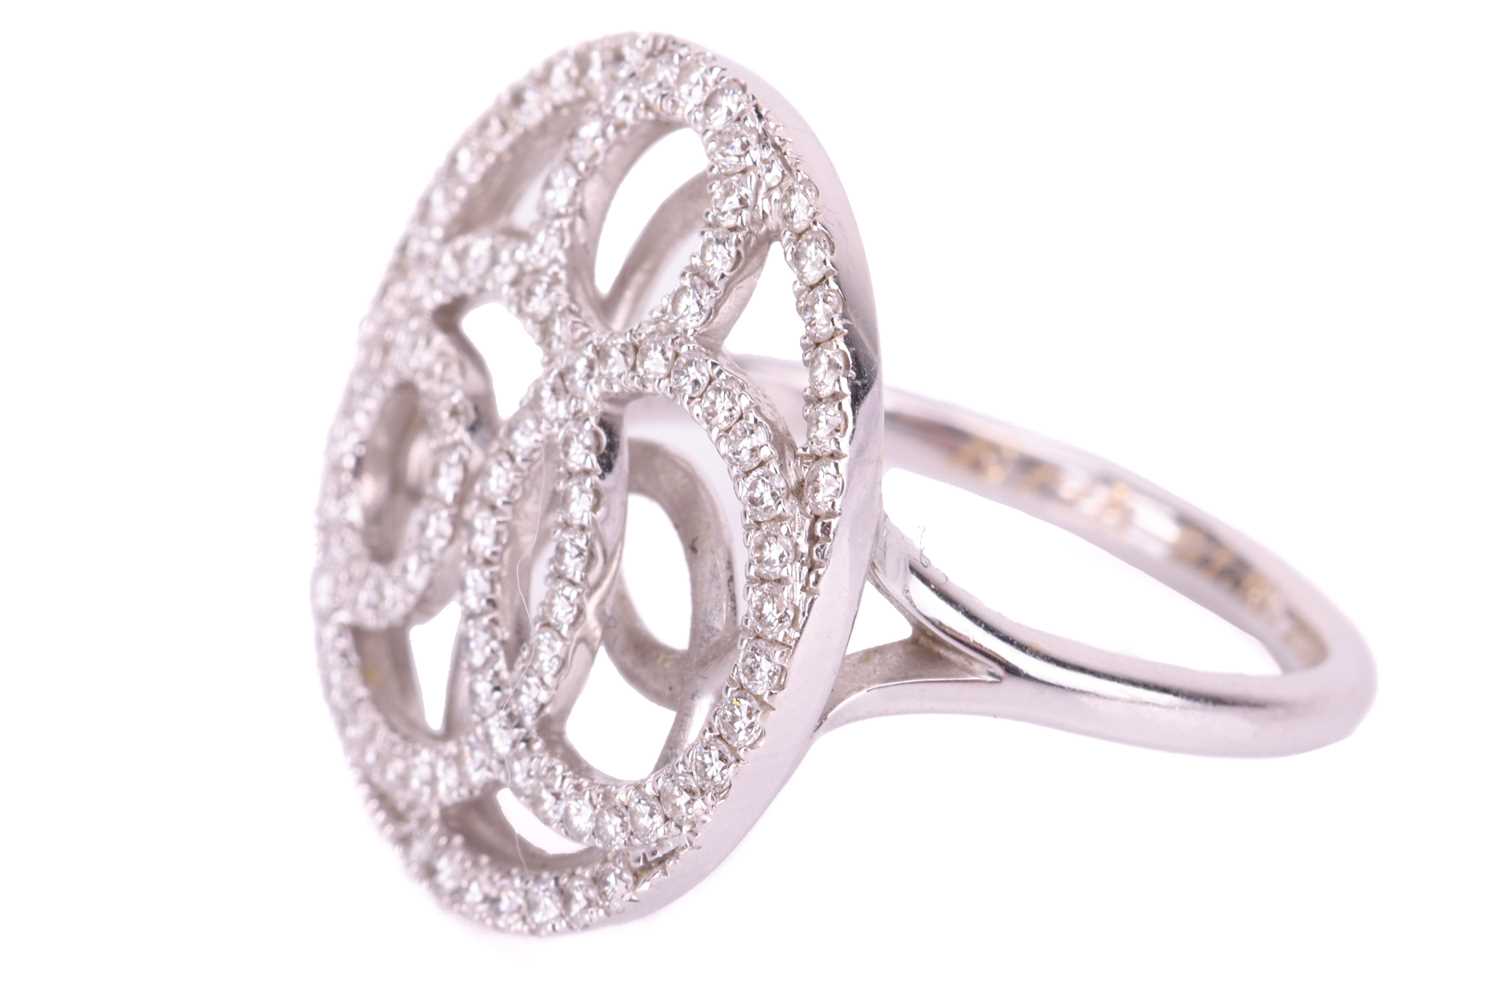 A De Beers pierced panel ring in 18ct white gold, round head of swirl design encrusted with brillian - Image 3 of 5